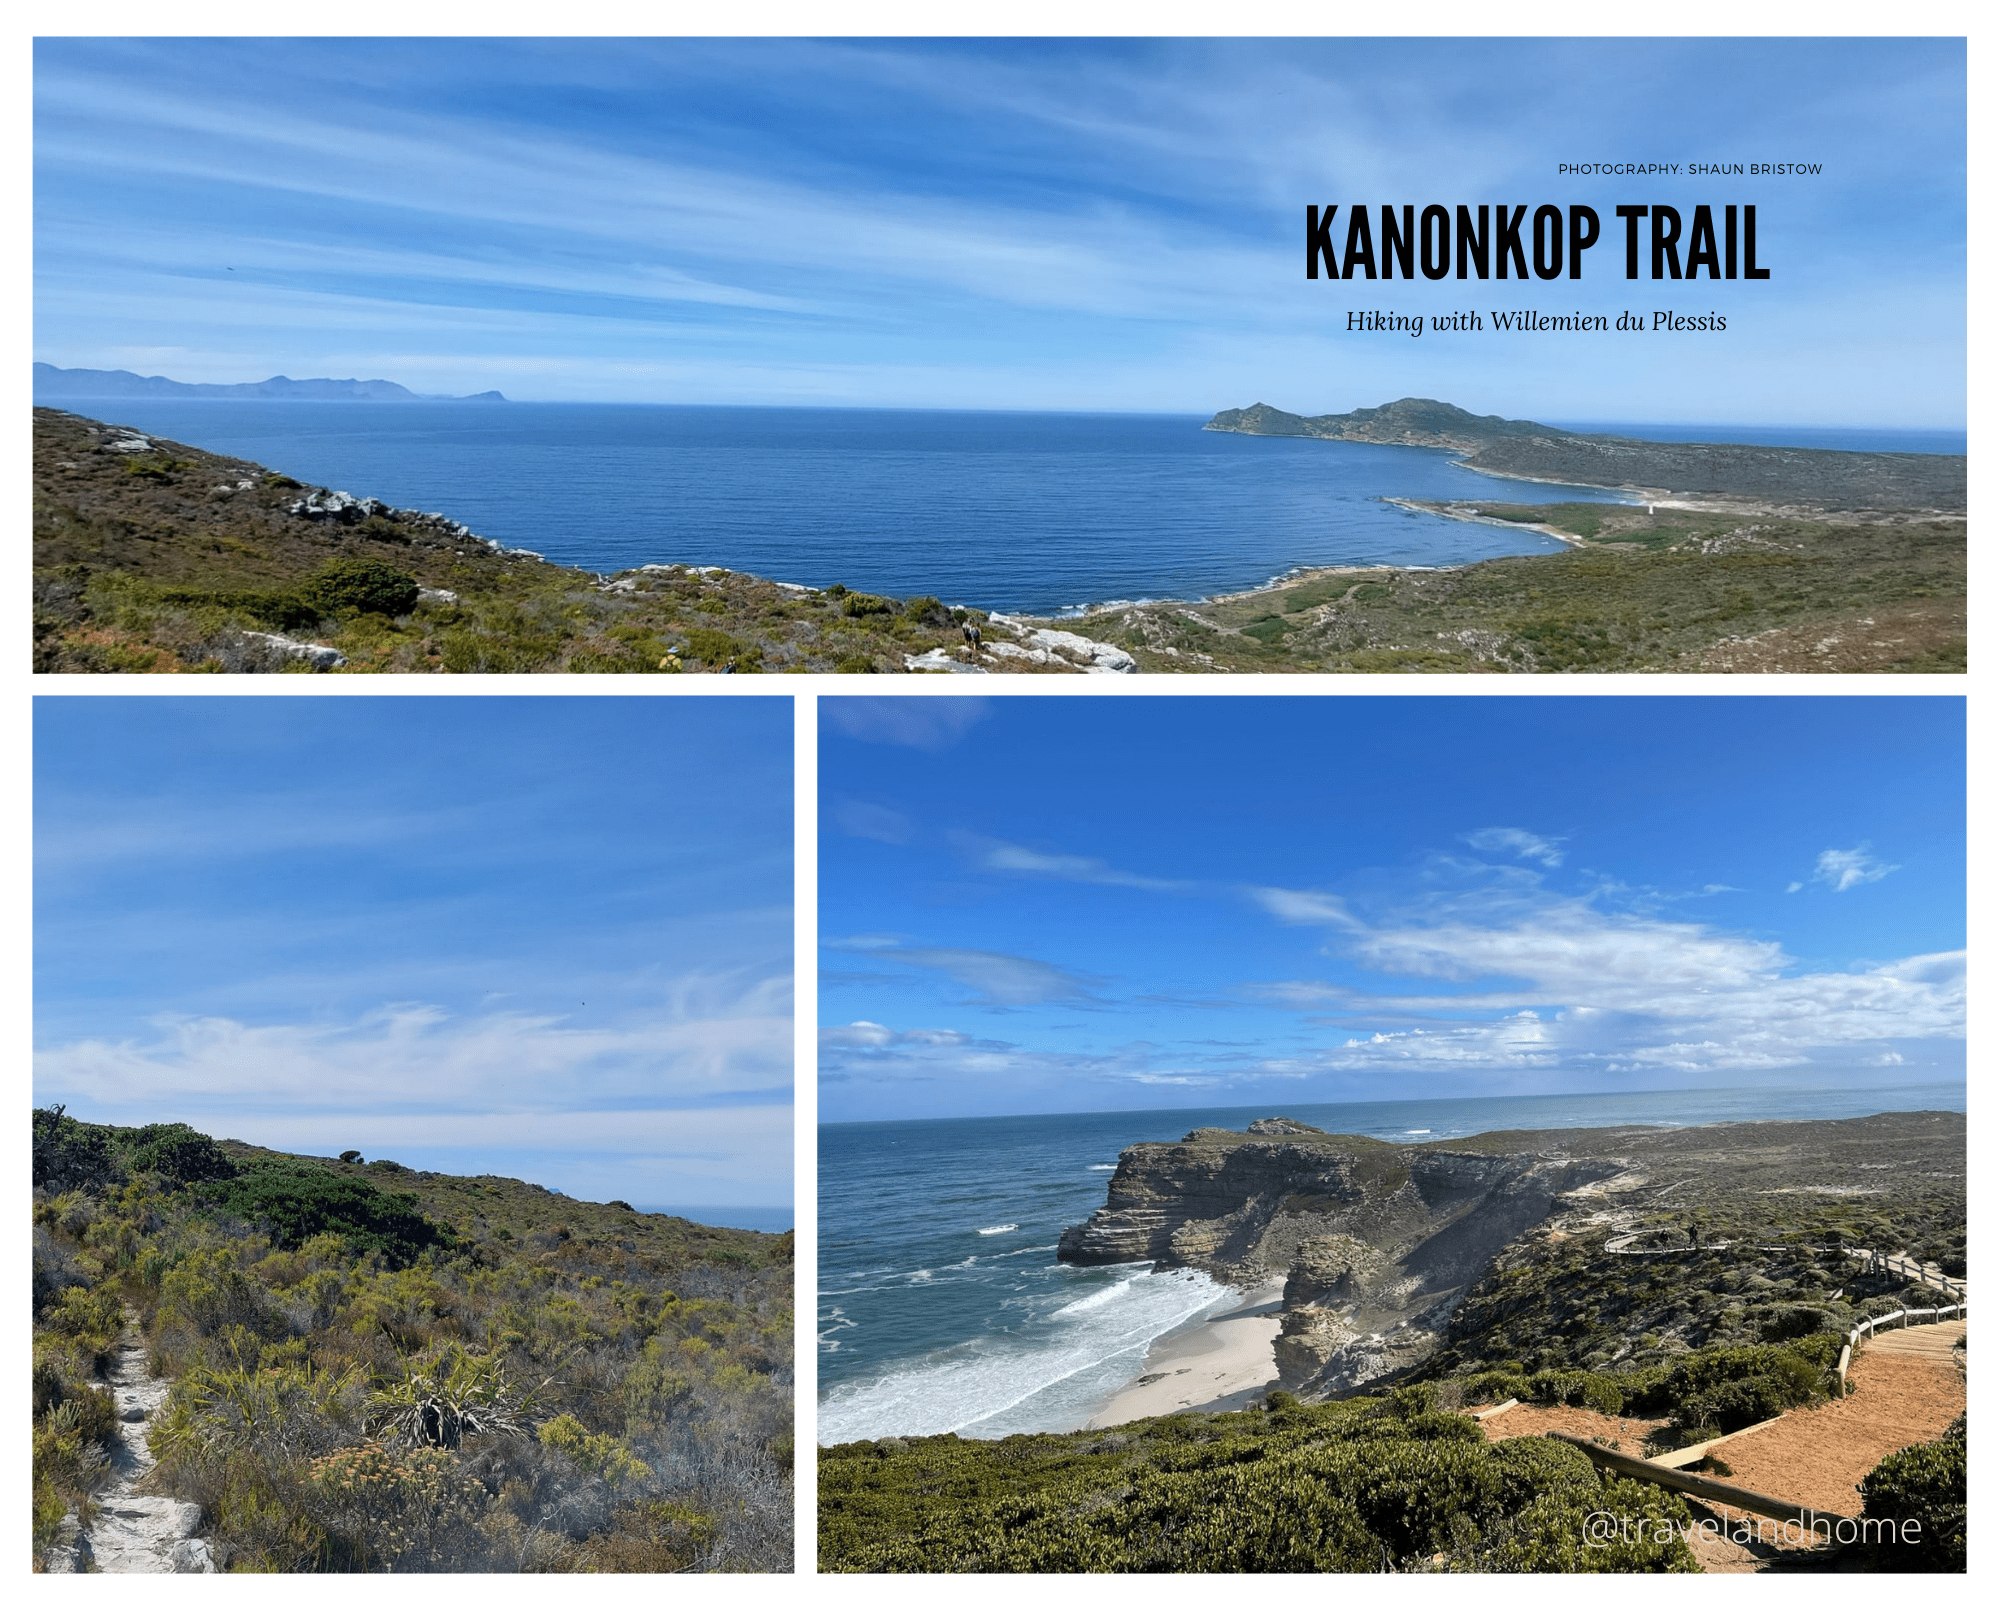 Kanonkop Trail hiking in and around Cape Town Western Cape South Africa nature sea ocean scenic views min